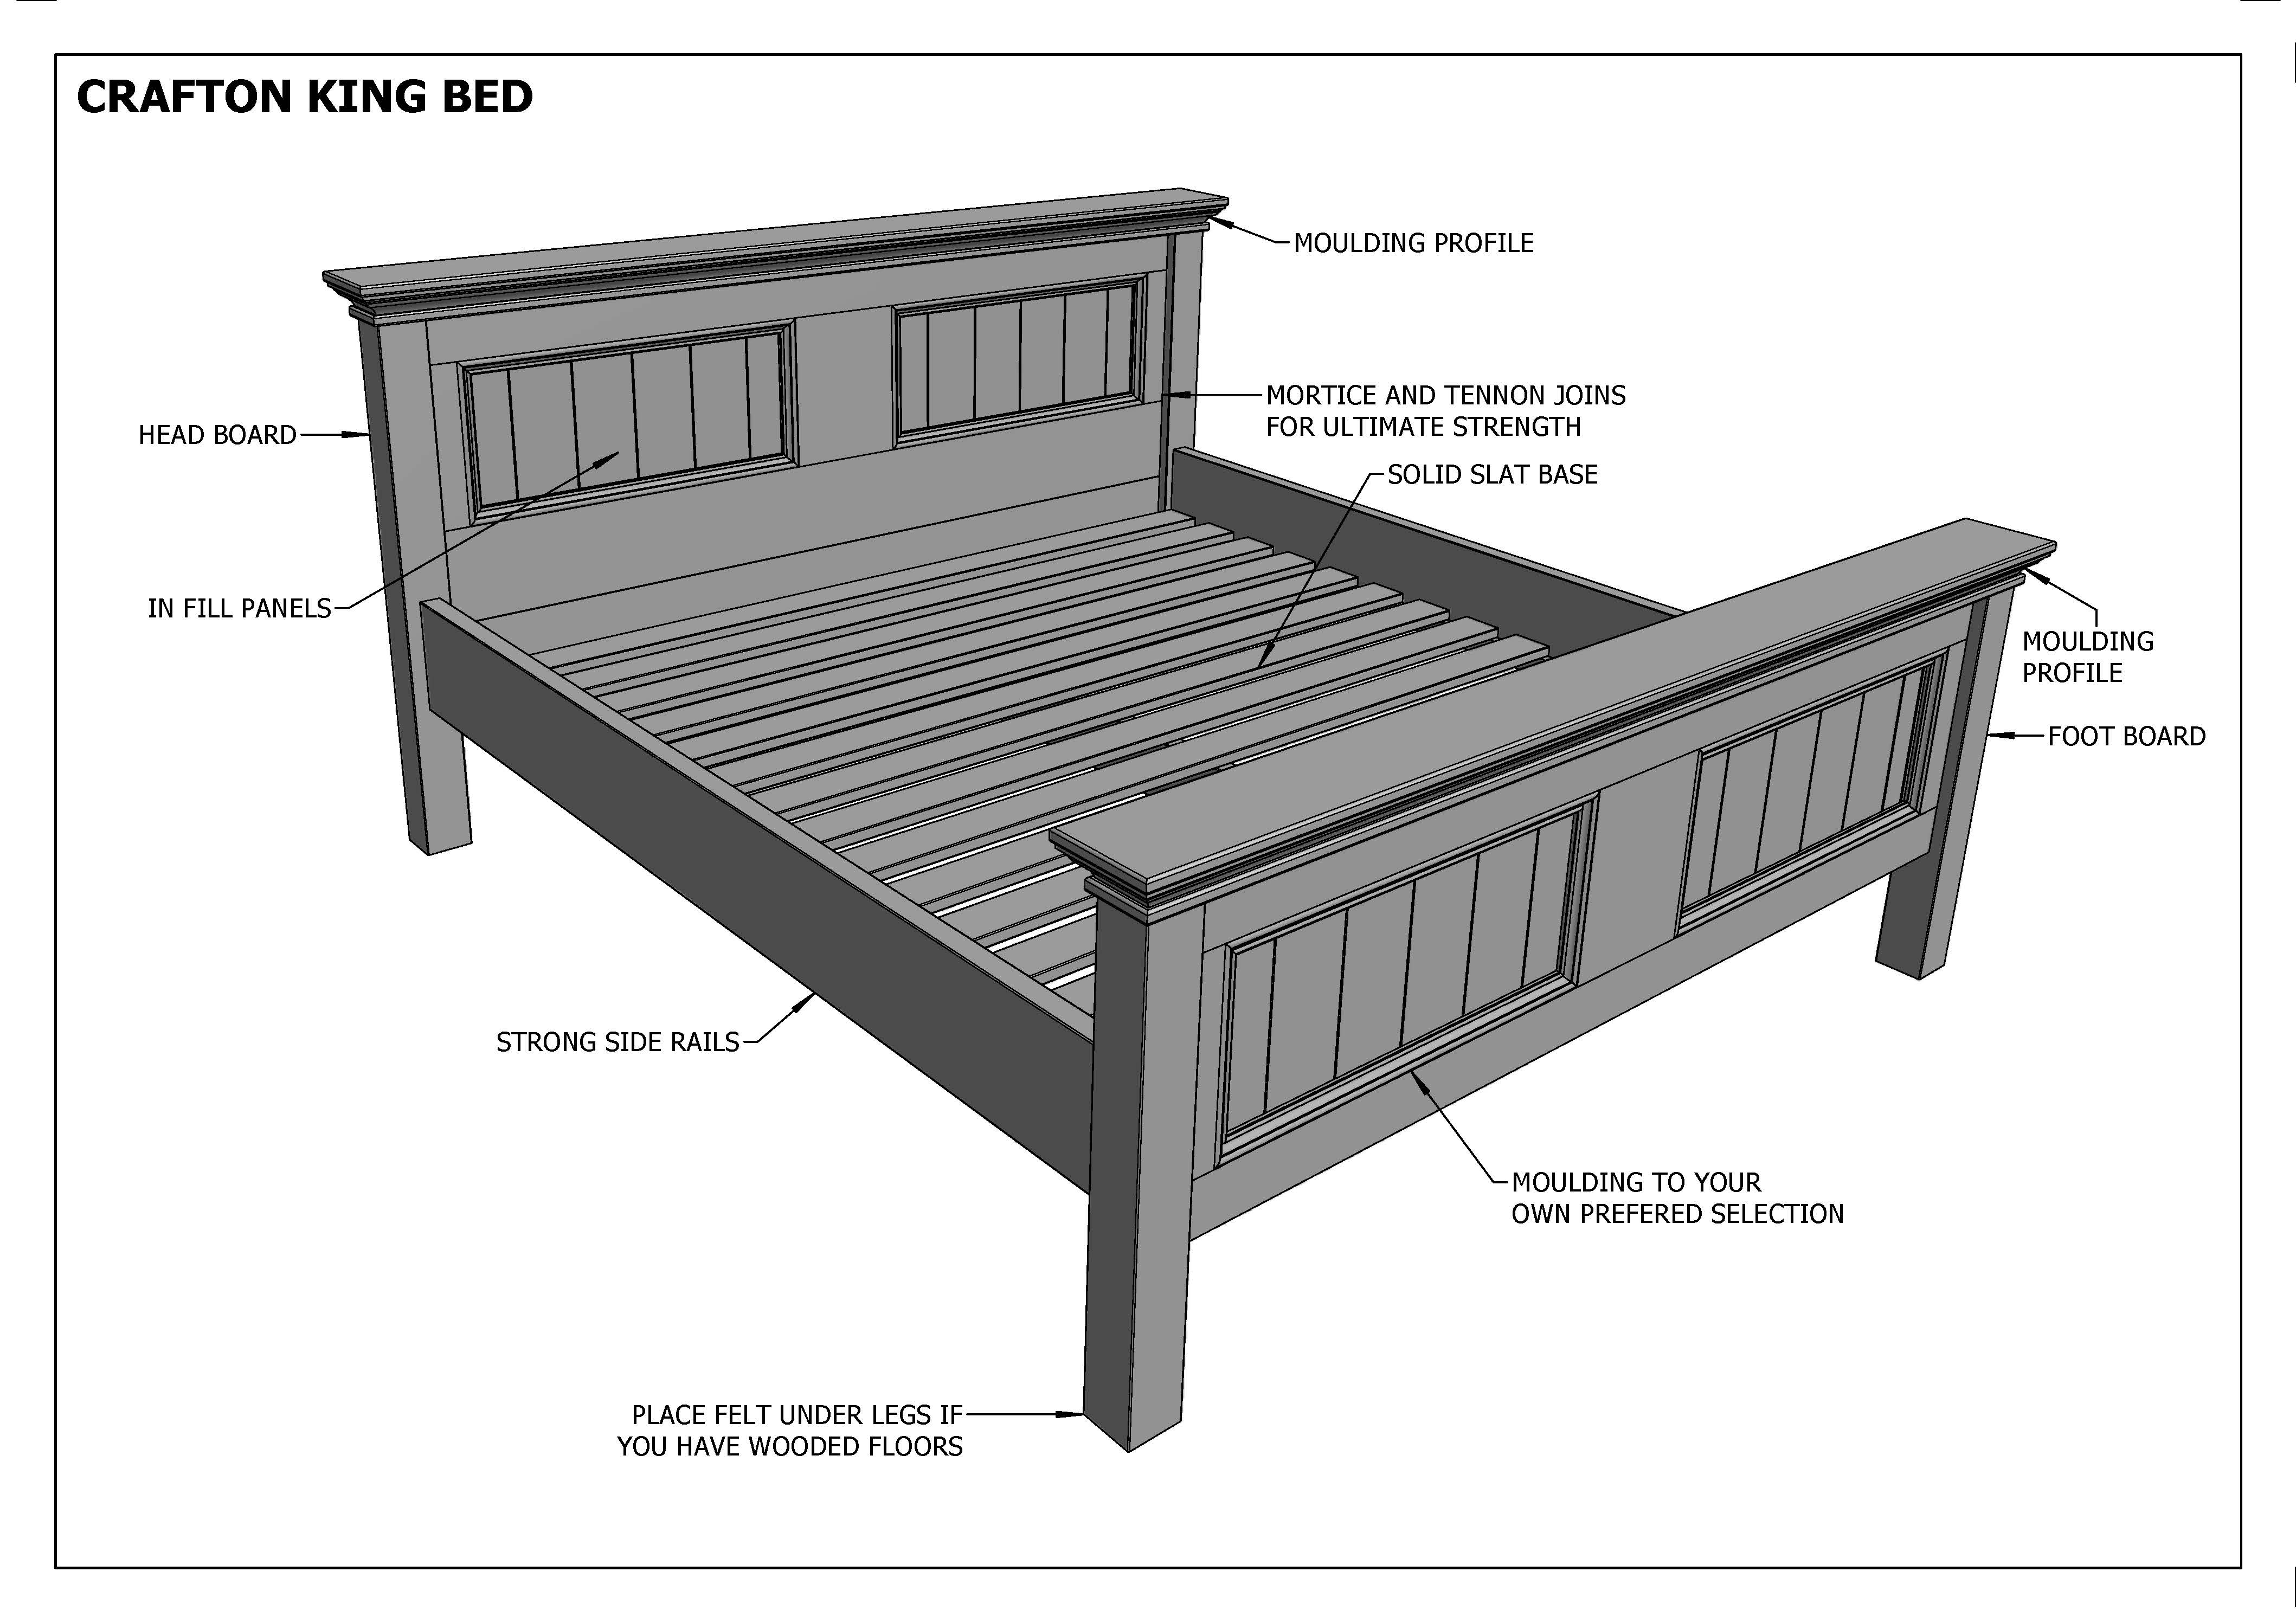 BUILDING PLANS FOR CRAFTON KING SIZE TIMBER BED - MAKE YOUR OWN & SAVE